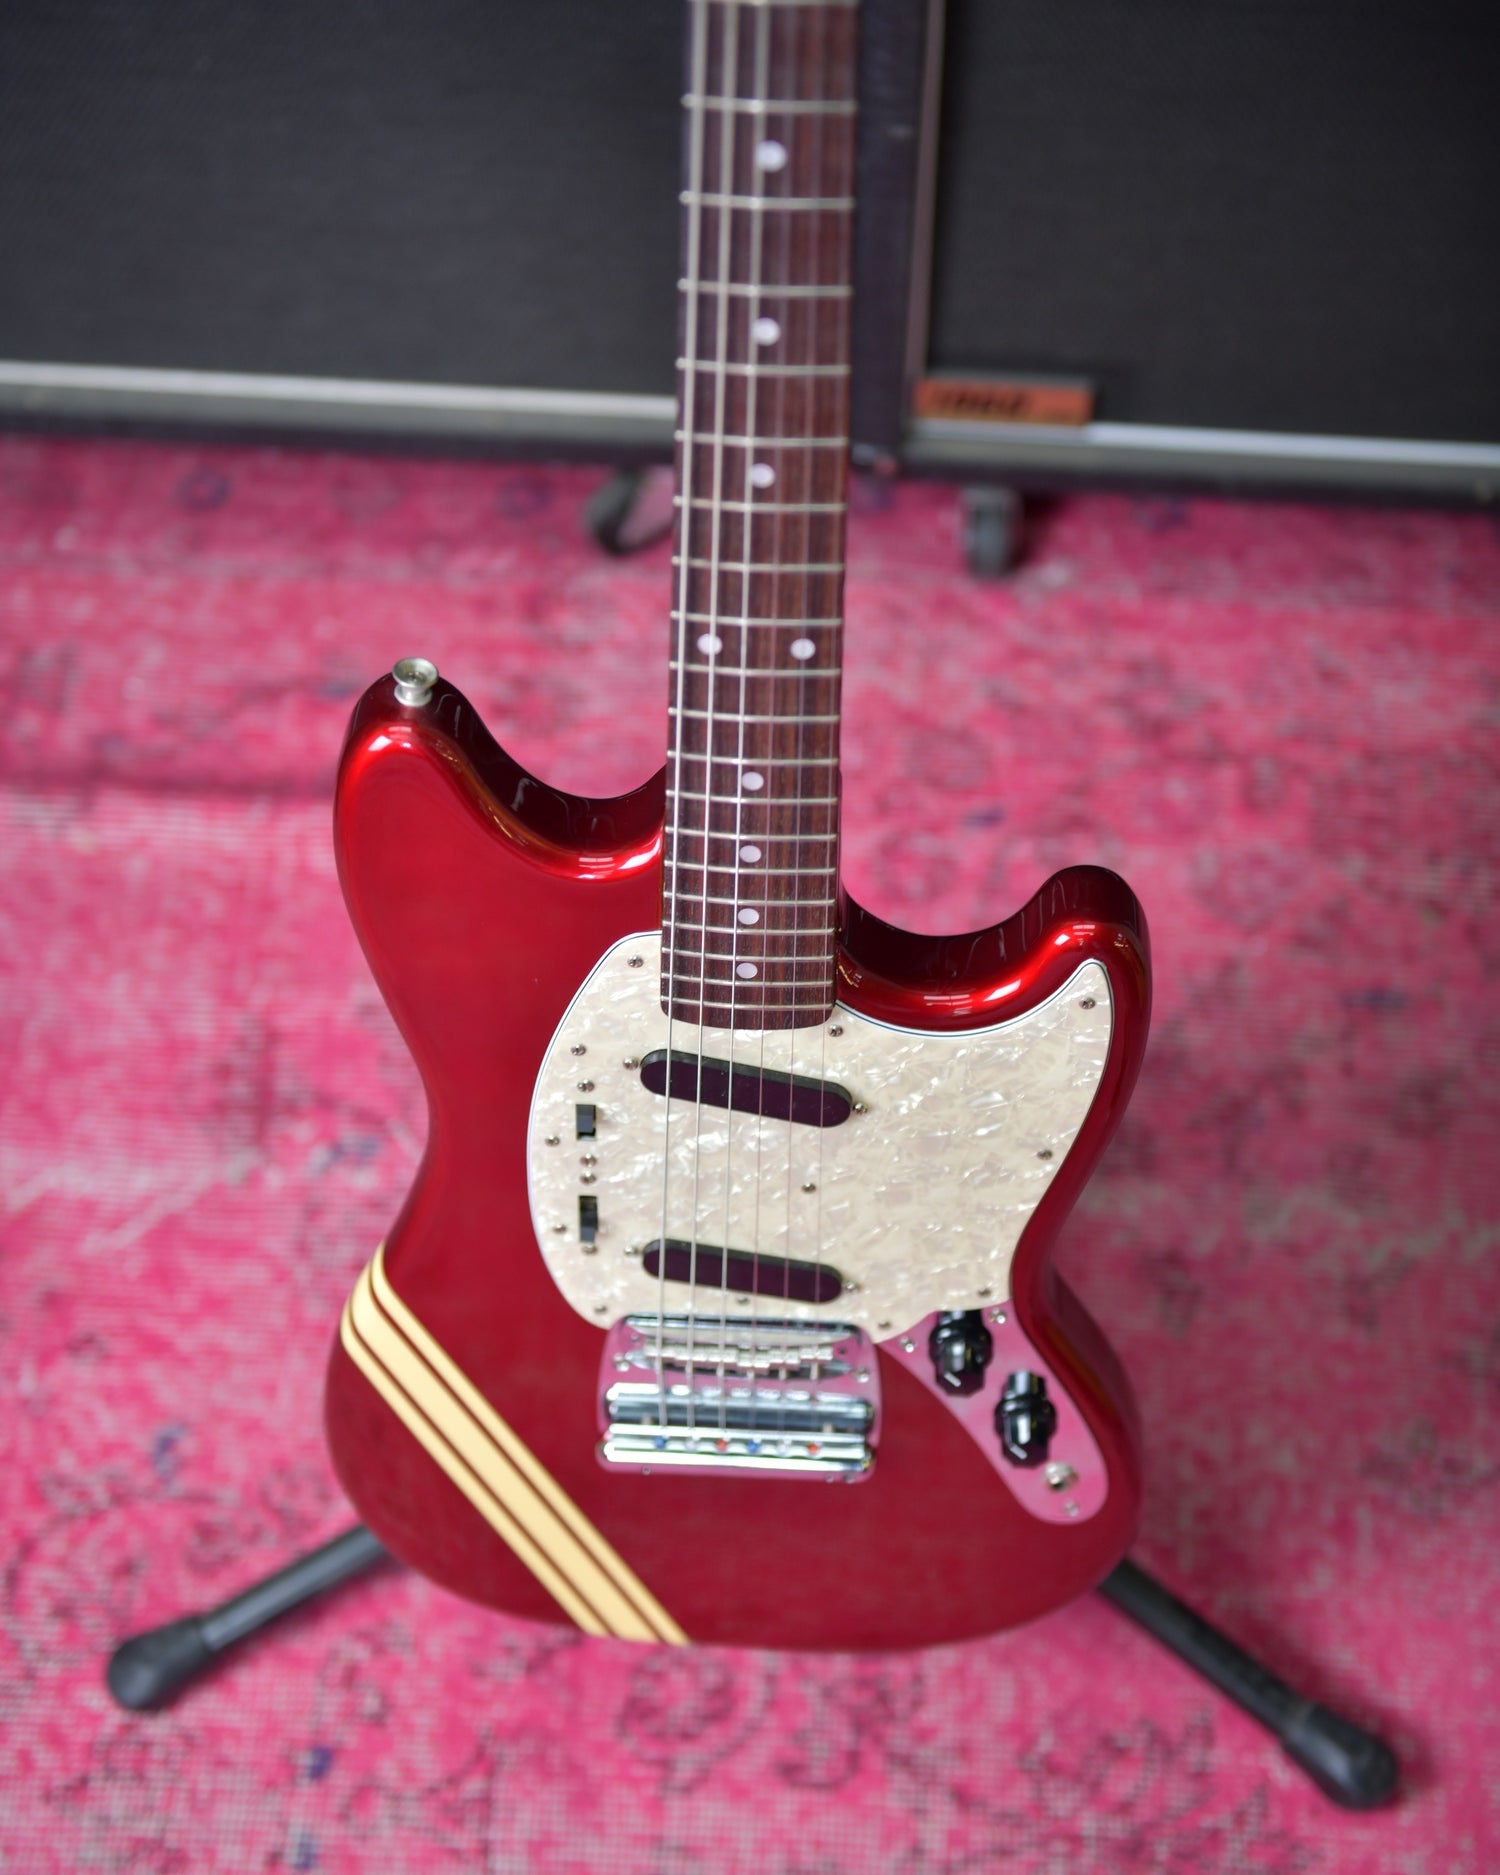 Fender Competition Mustang 73 Reissue CIJ Candy Apple Red Japan